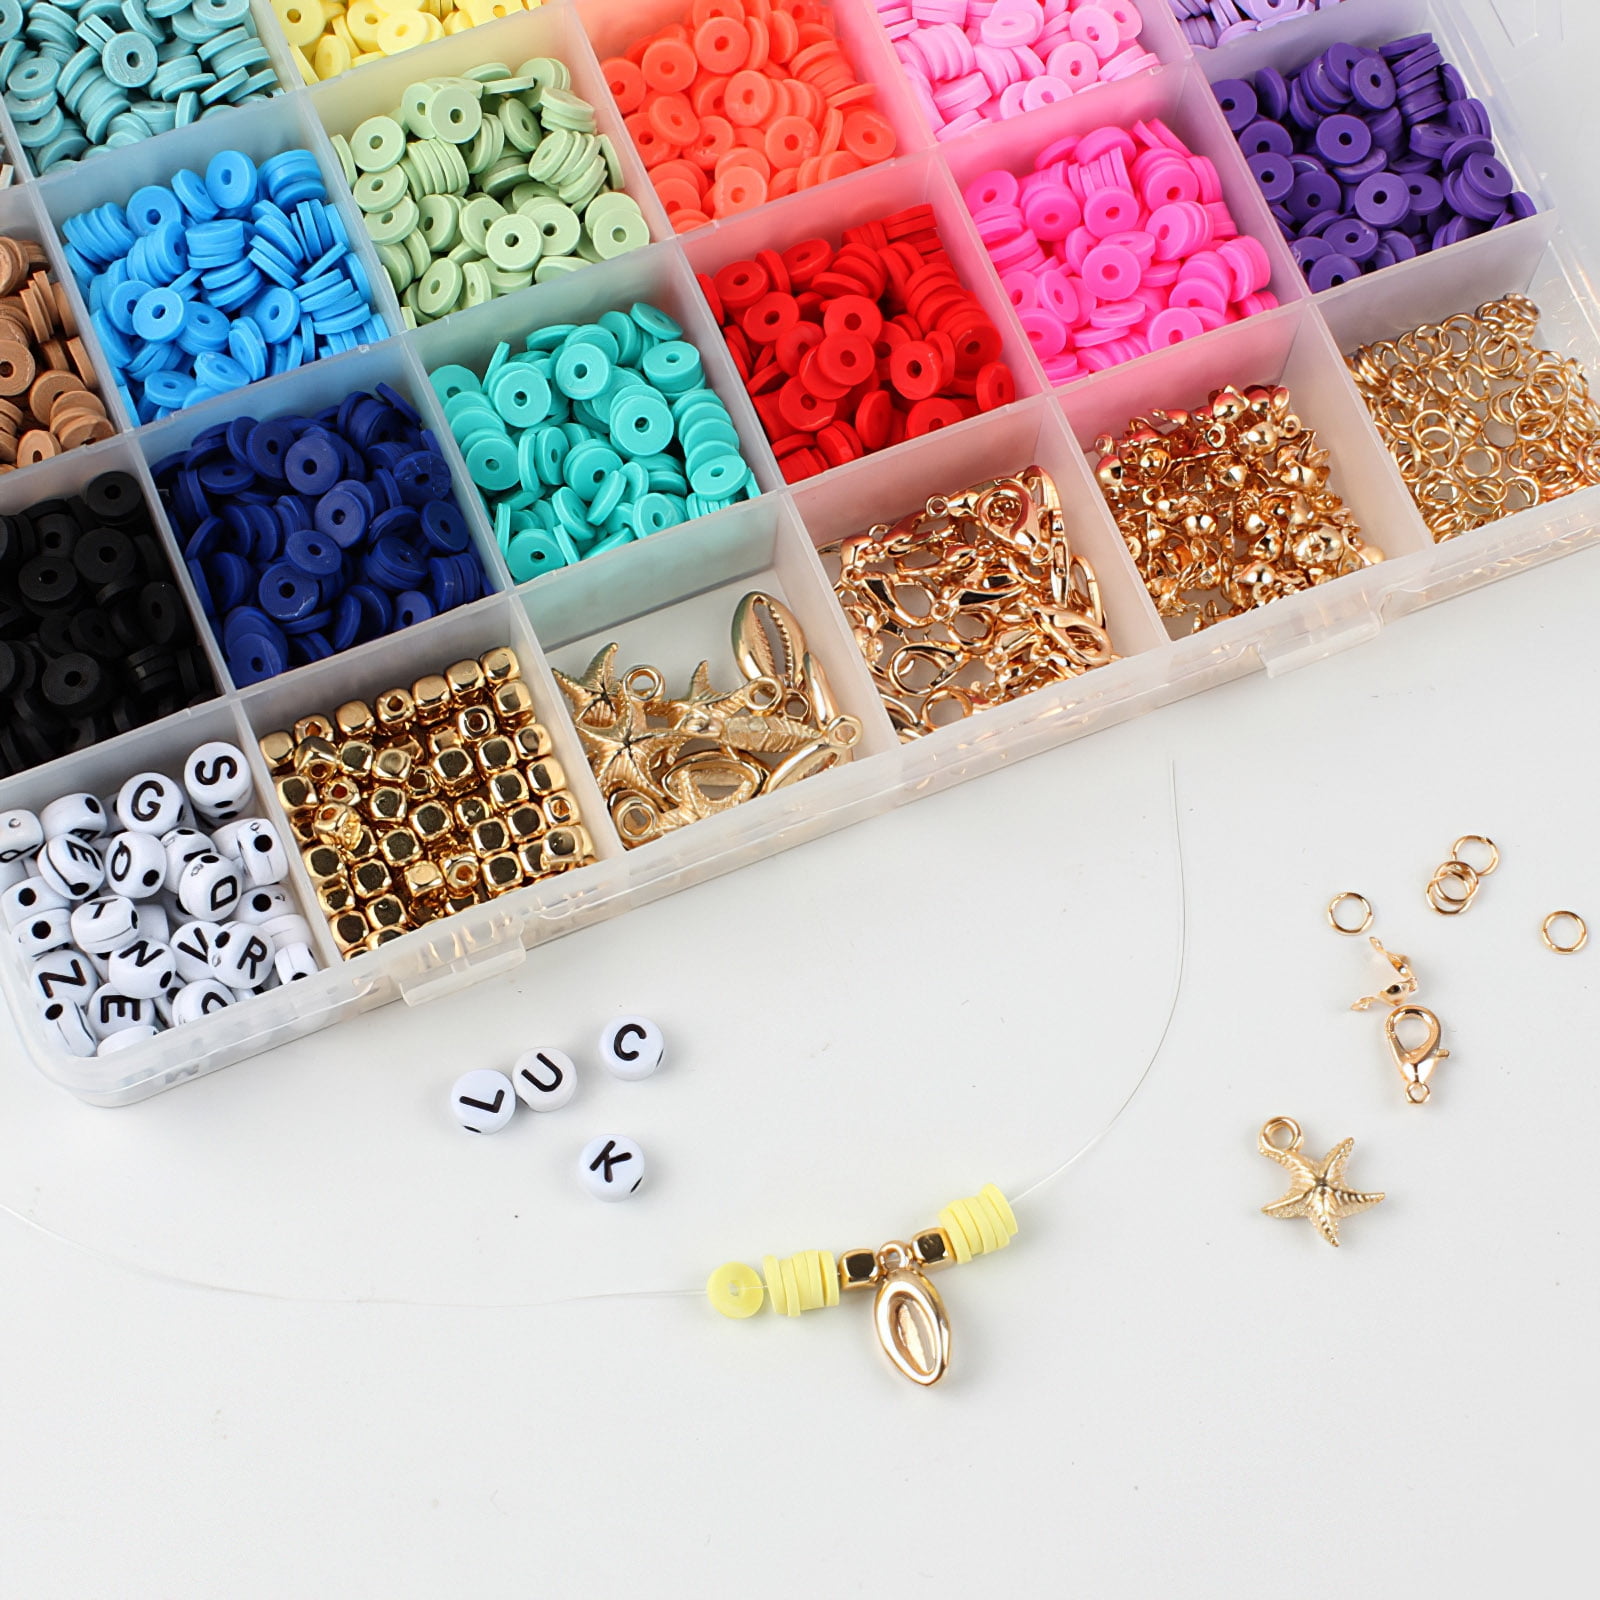 24 Grid Optional Clay Beads Bracelet Making Kit, Free to mix and match